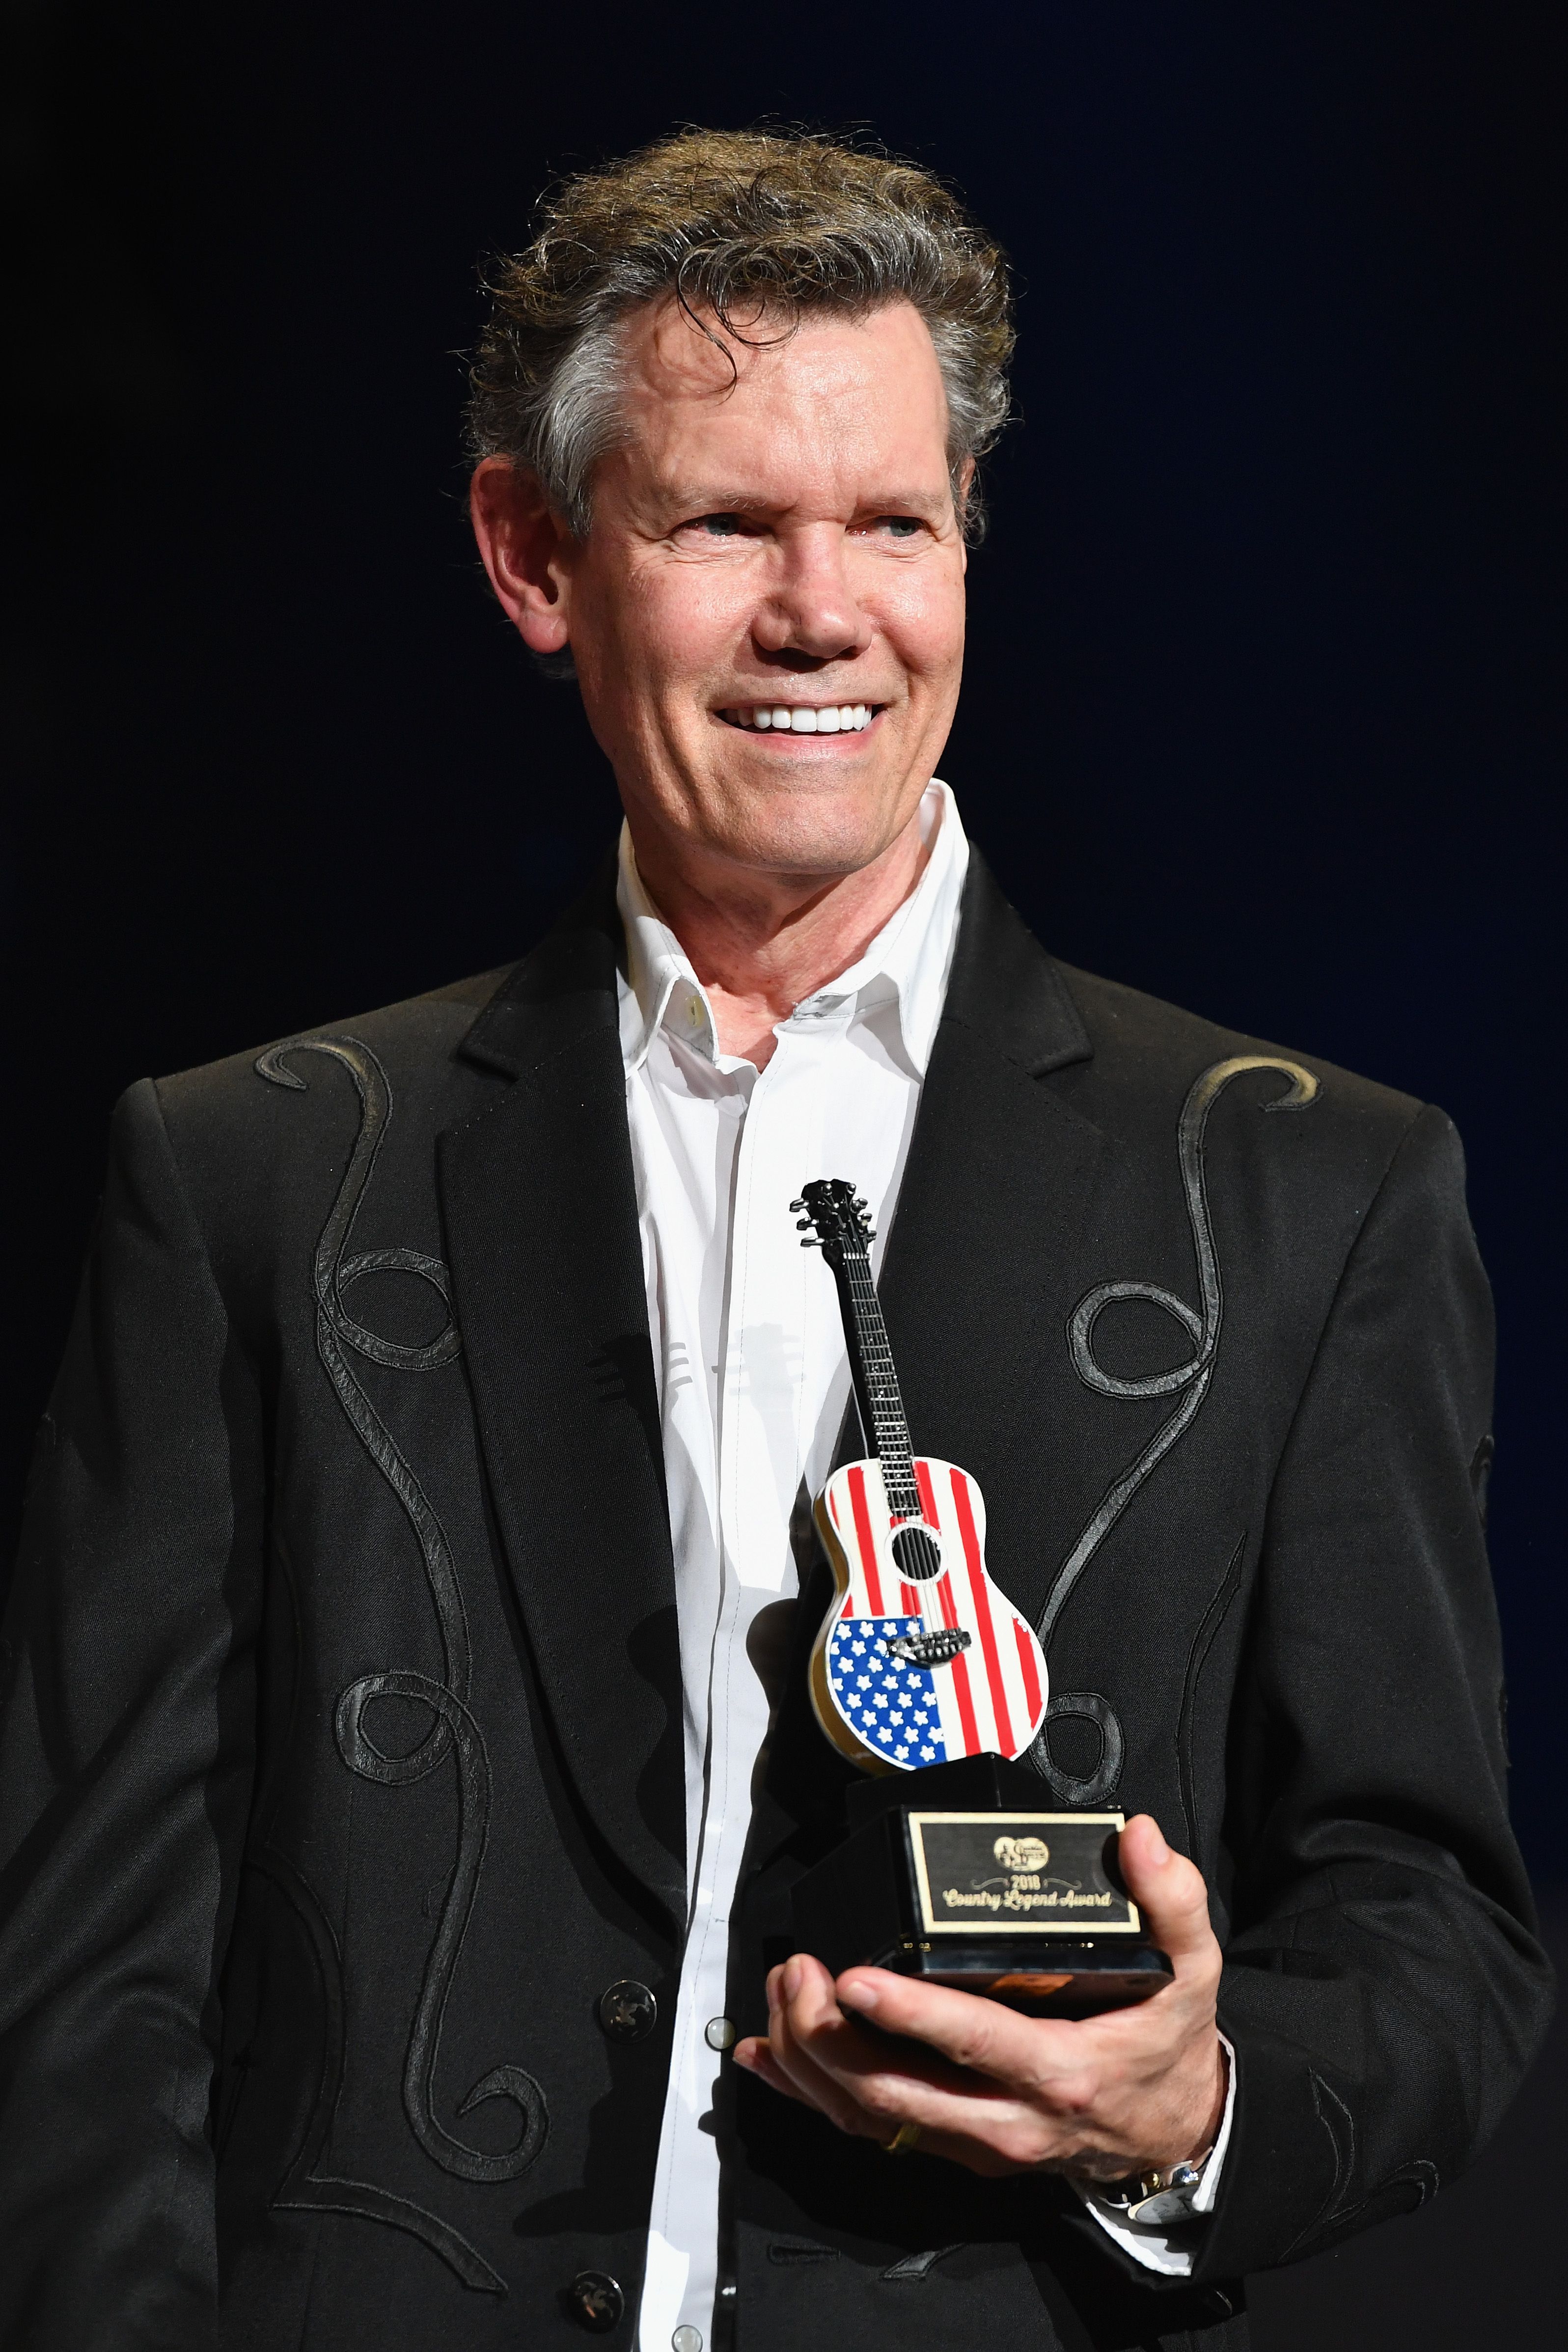 Randy Travis receives an award during the CMA Music Festival on June 9, 2018. | Photo: Getty Images